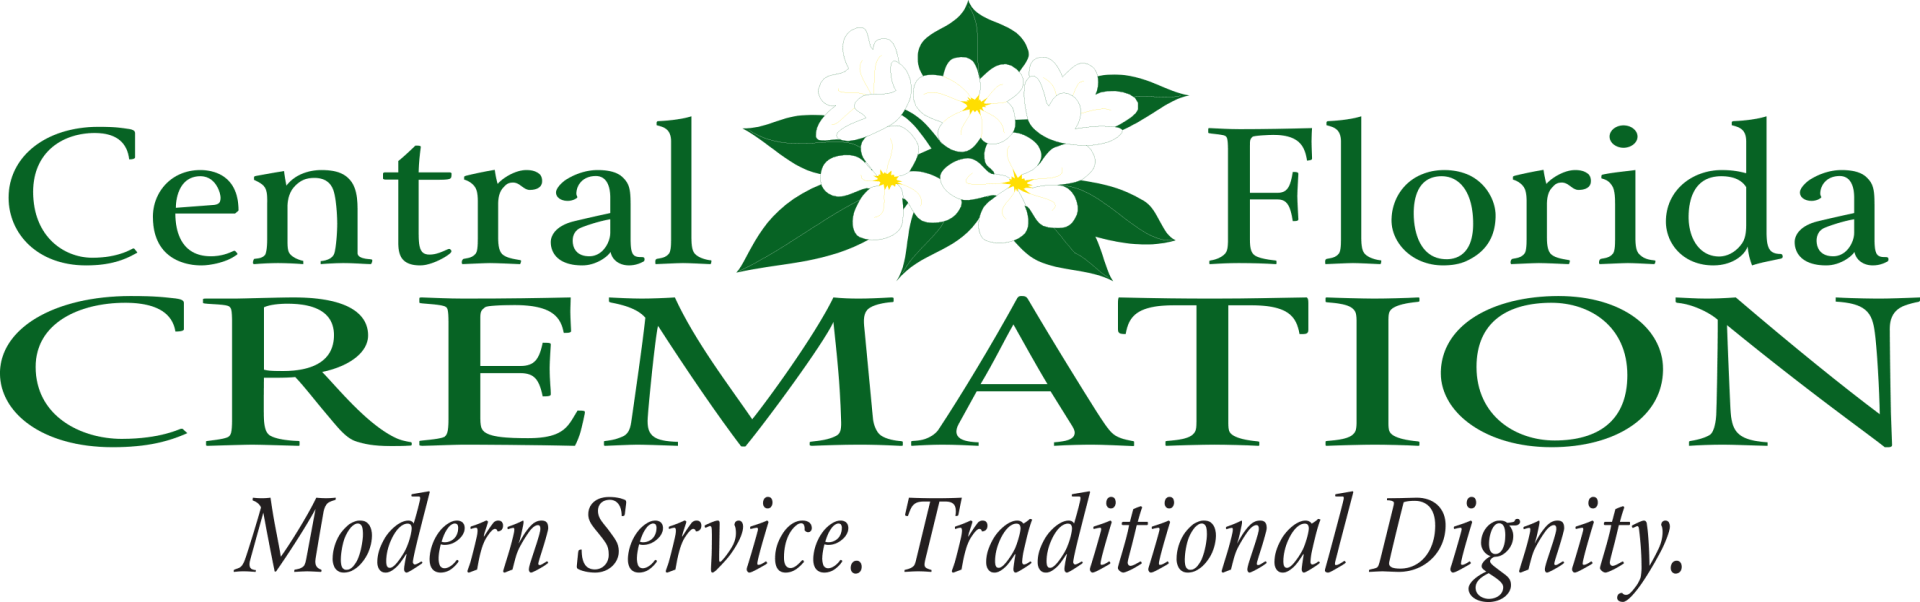 the logo for central florida cremation modern service traditional dignity .